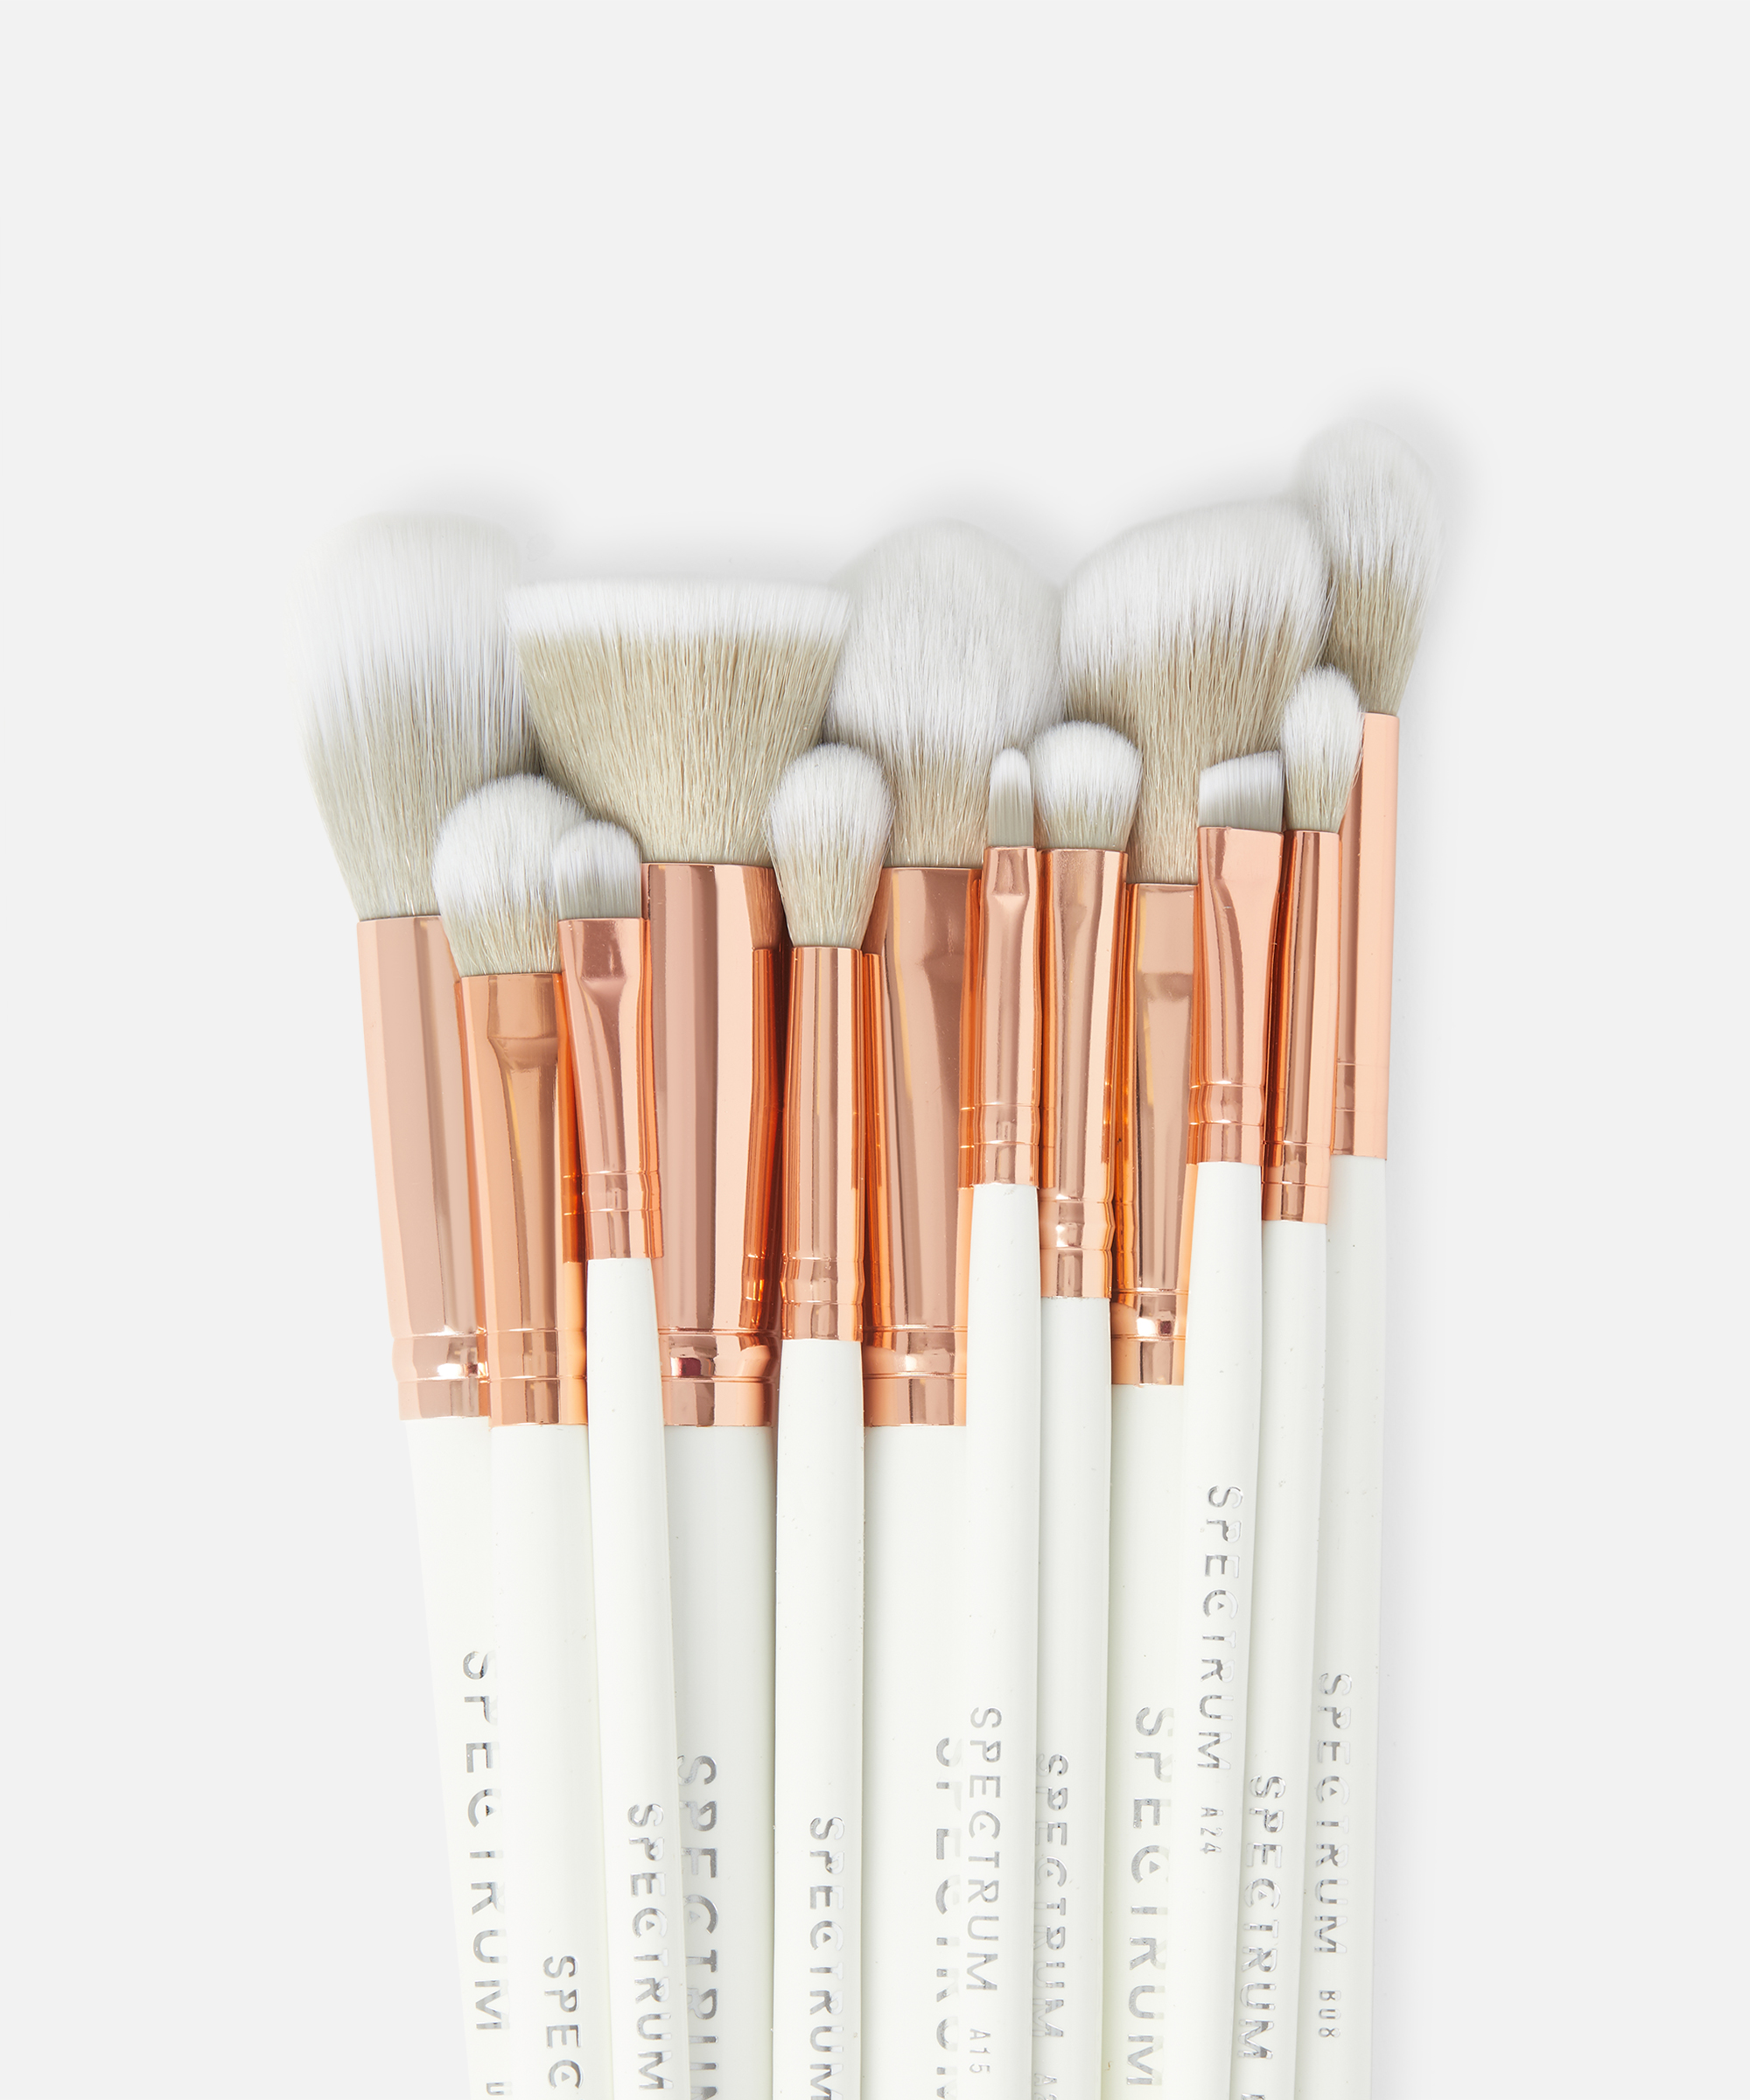 Spectrum Collections 12 Brush Set at